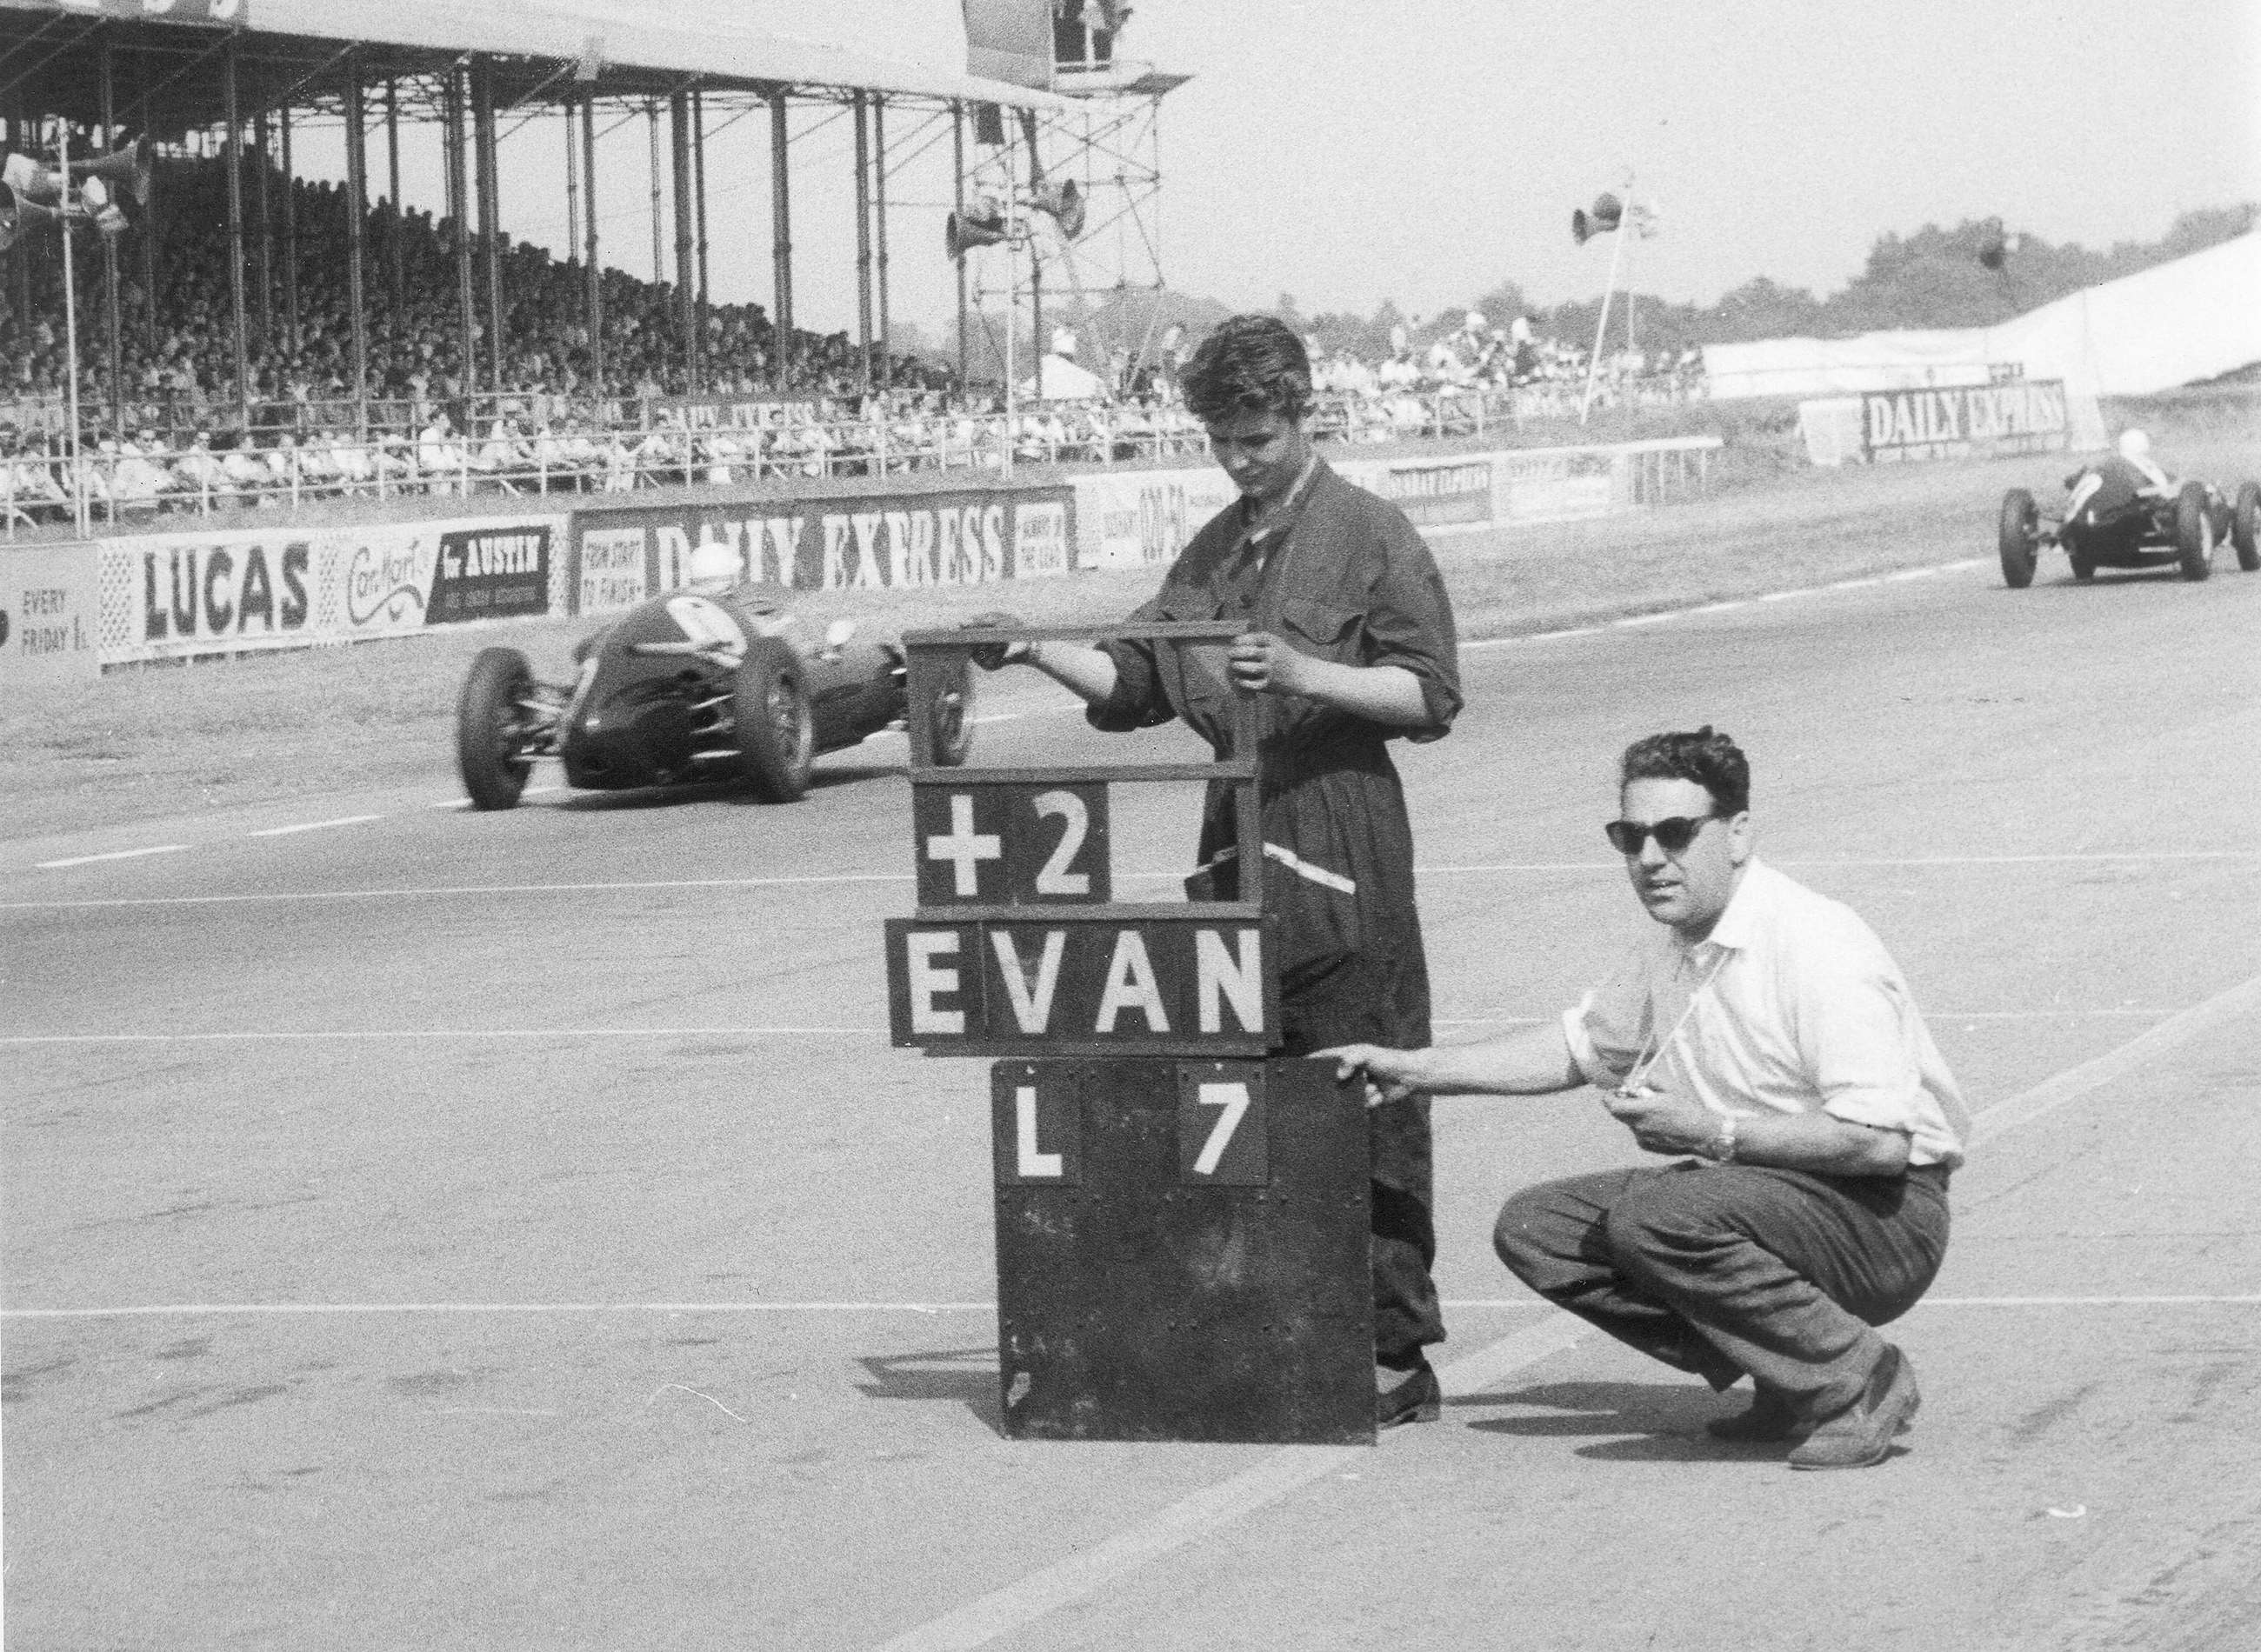 John Cooper signalling his boys as they flash past. Note the ‘pit lane protection’ provided in those days - 60 years ago…